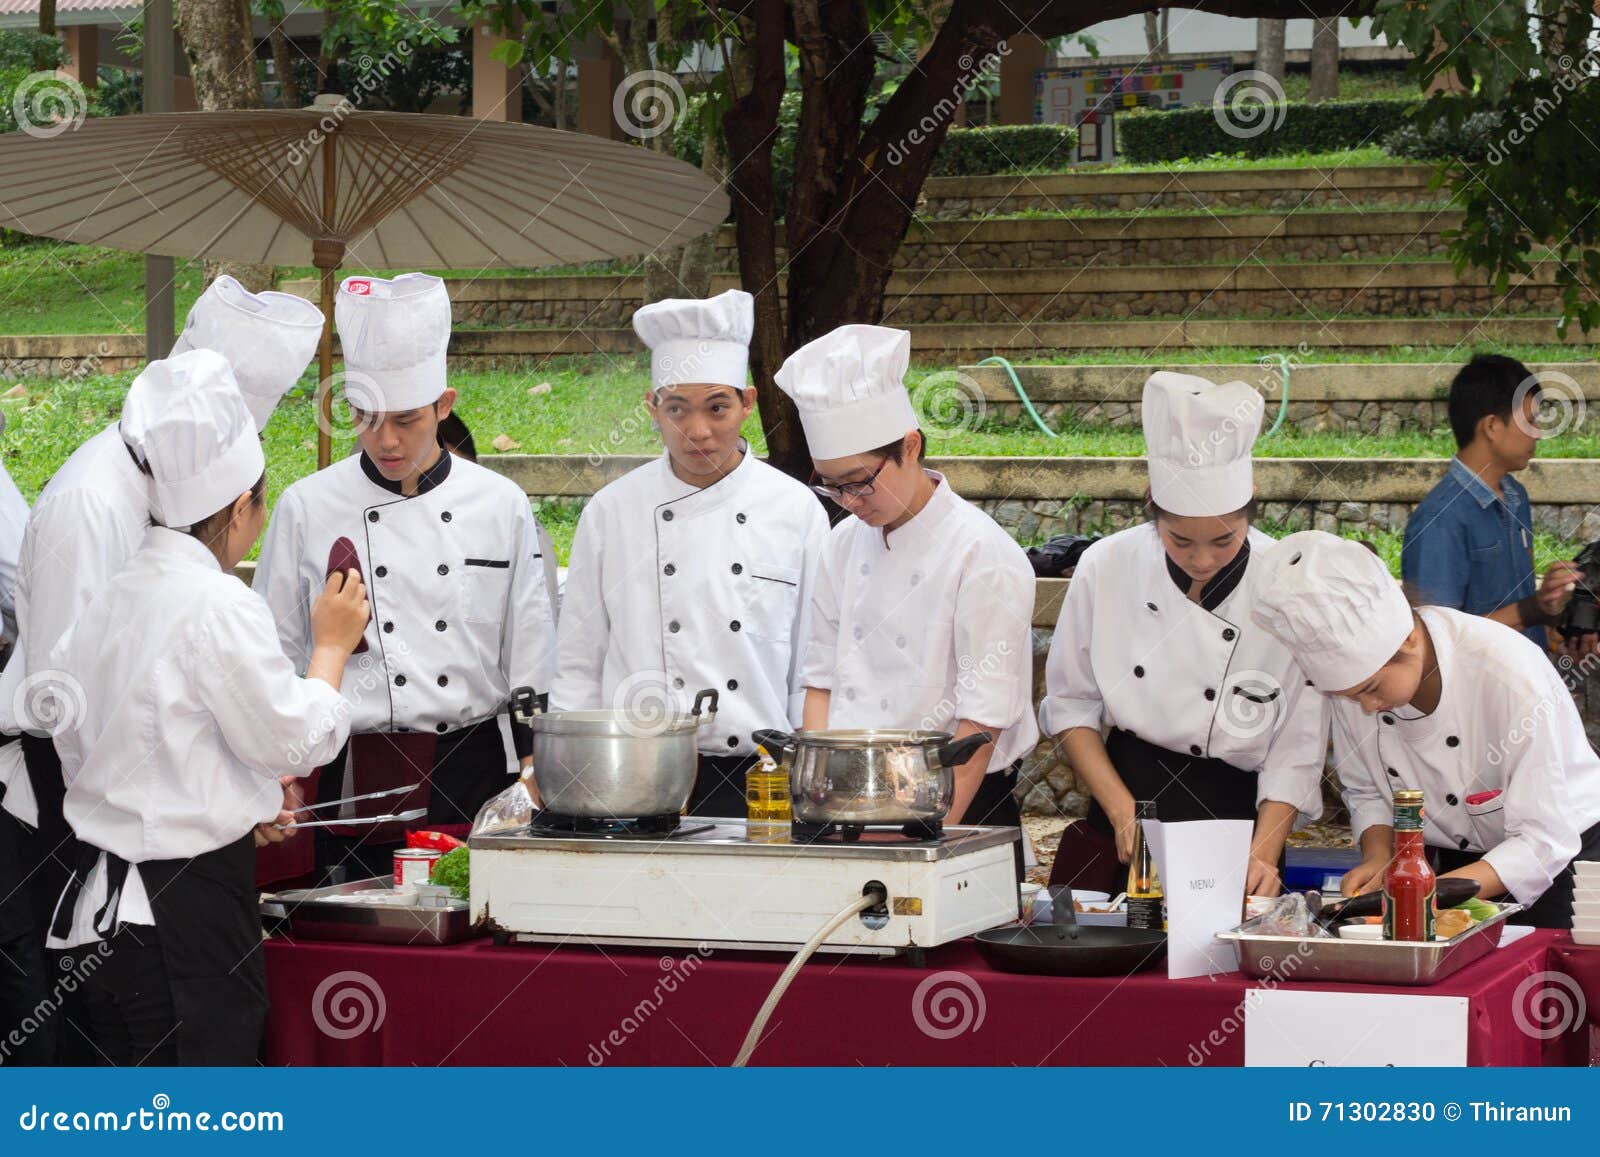 Cooking Competition School Of Business Management Students